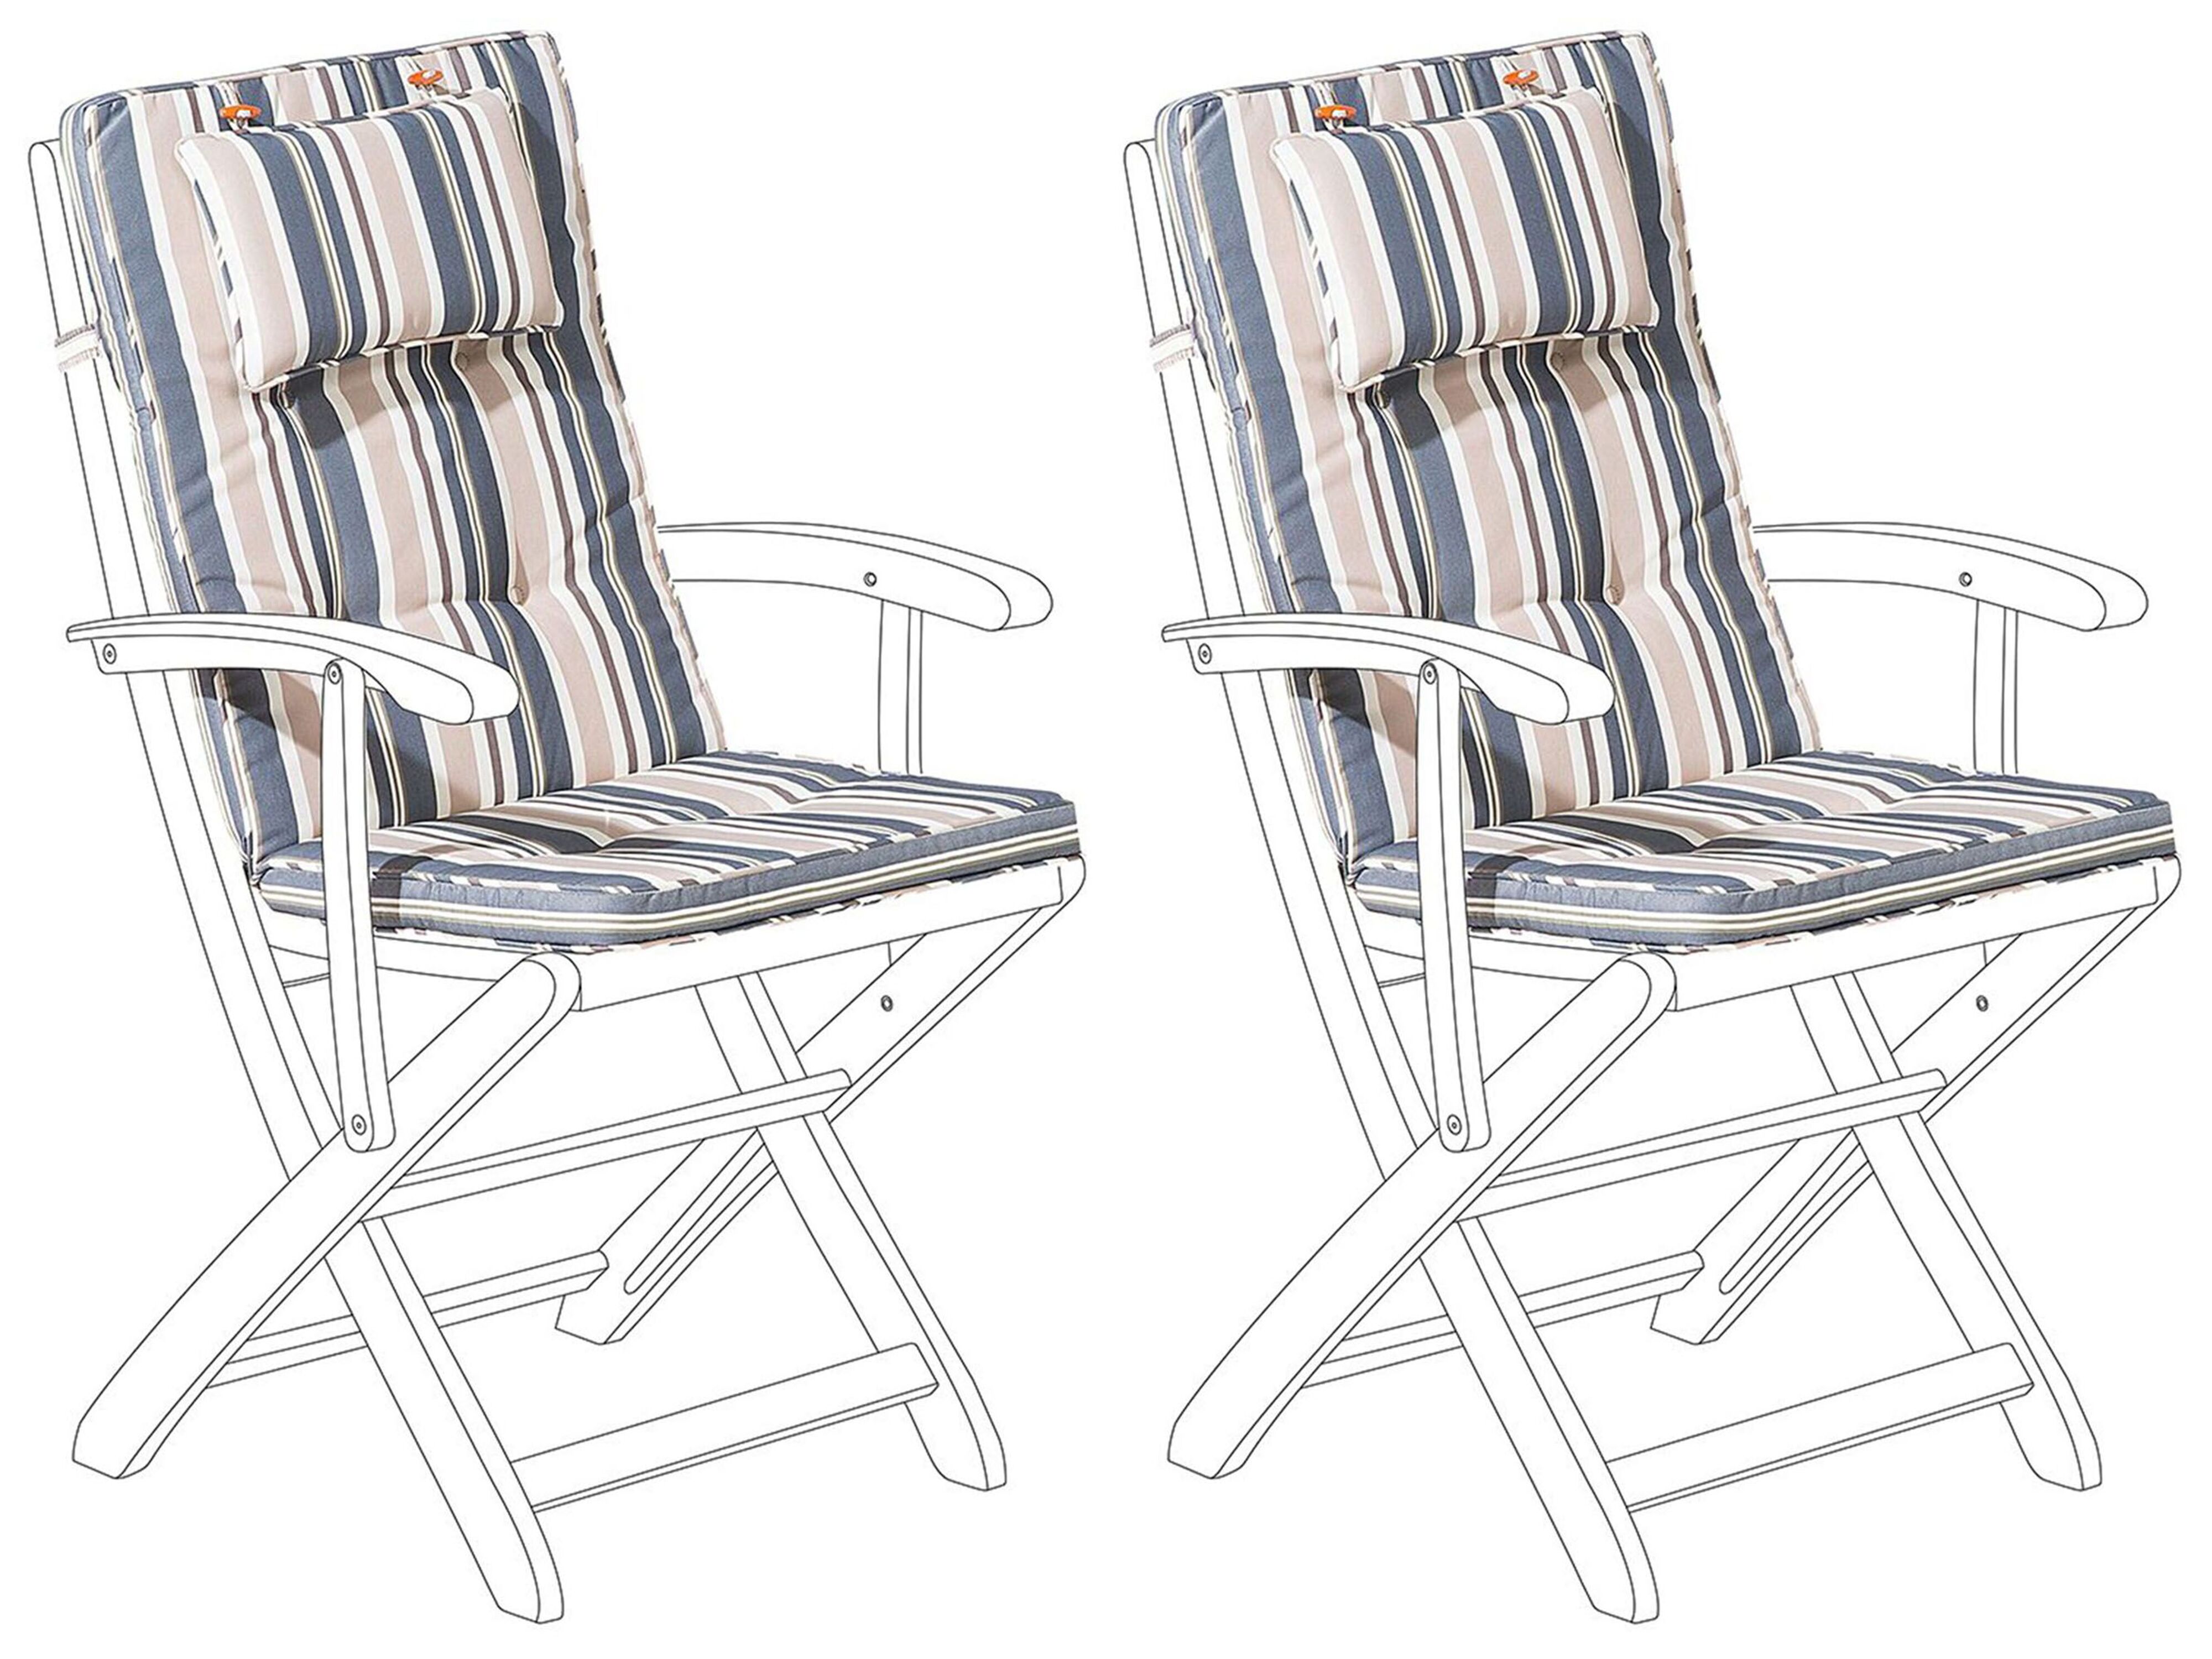 Set of 2 Outdoor Seat/Back Avandeo - store MAUI accessories to 70% up & off Furniture, online Blue Stripes Cushions lamps 